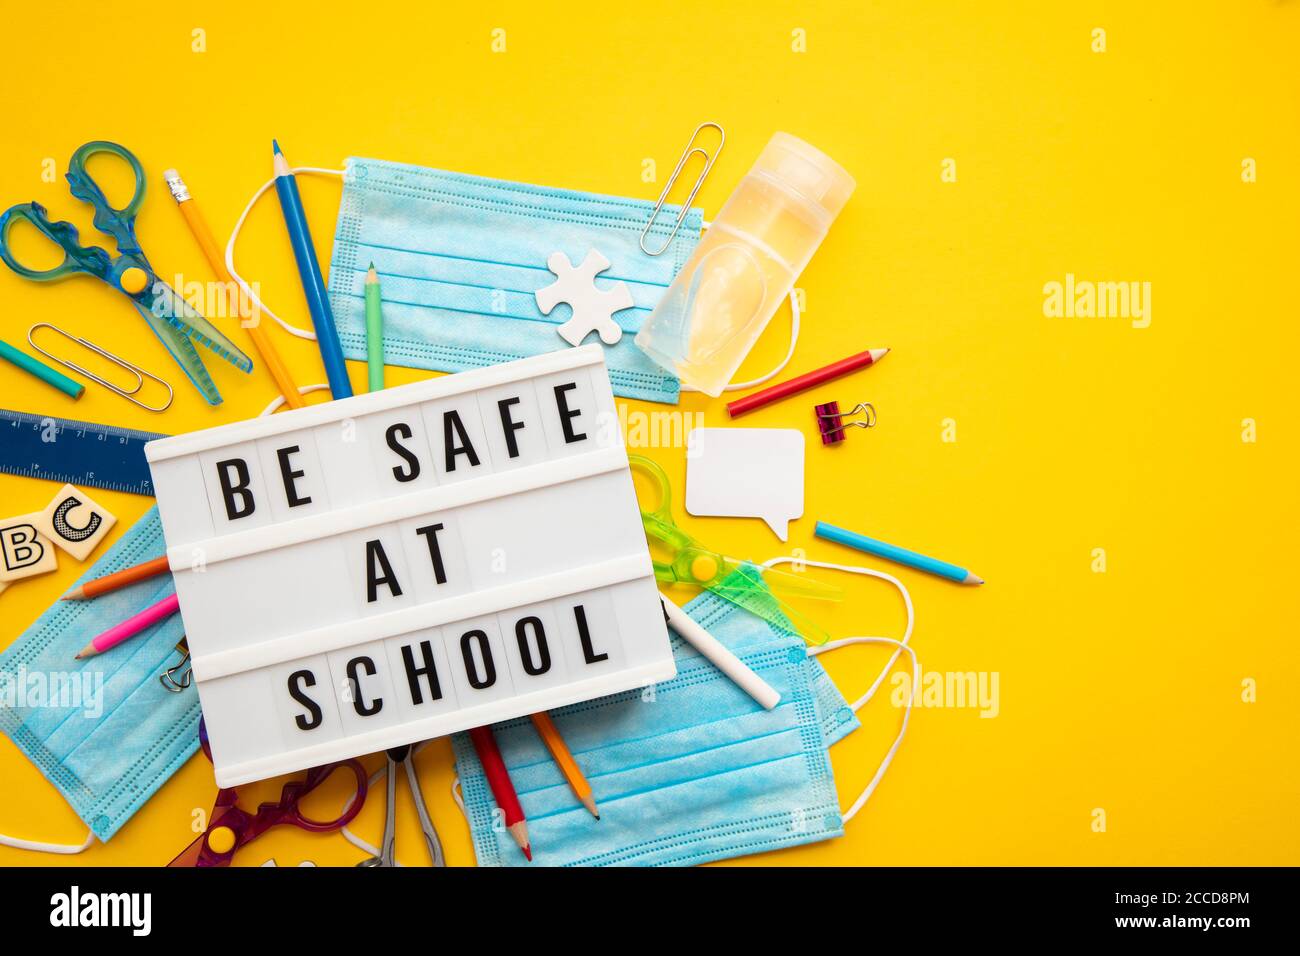 Be safe at school message with school equipment and covid masks Stock Photo